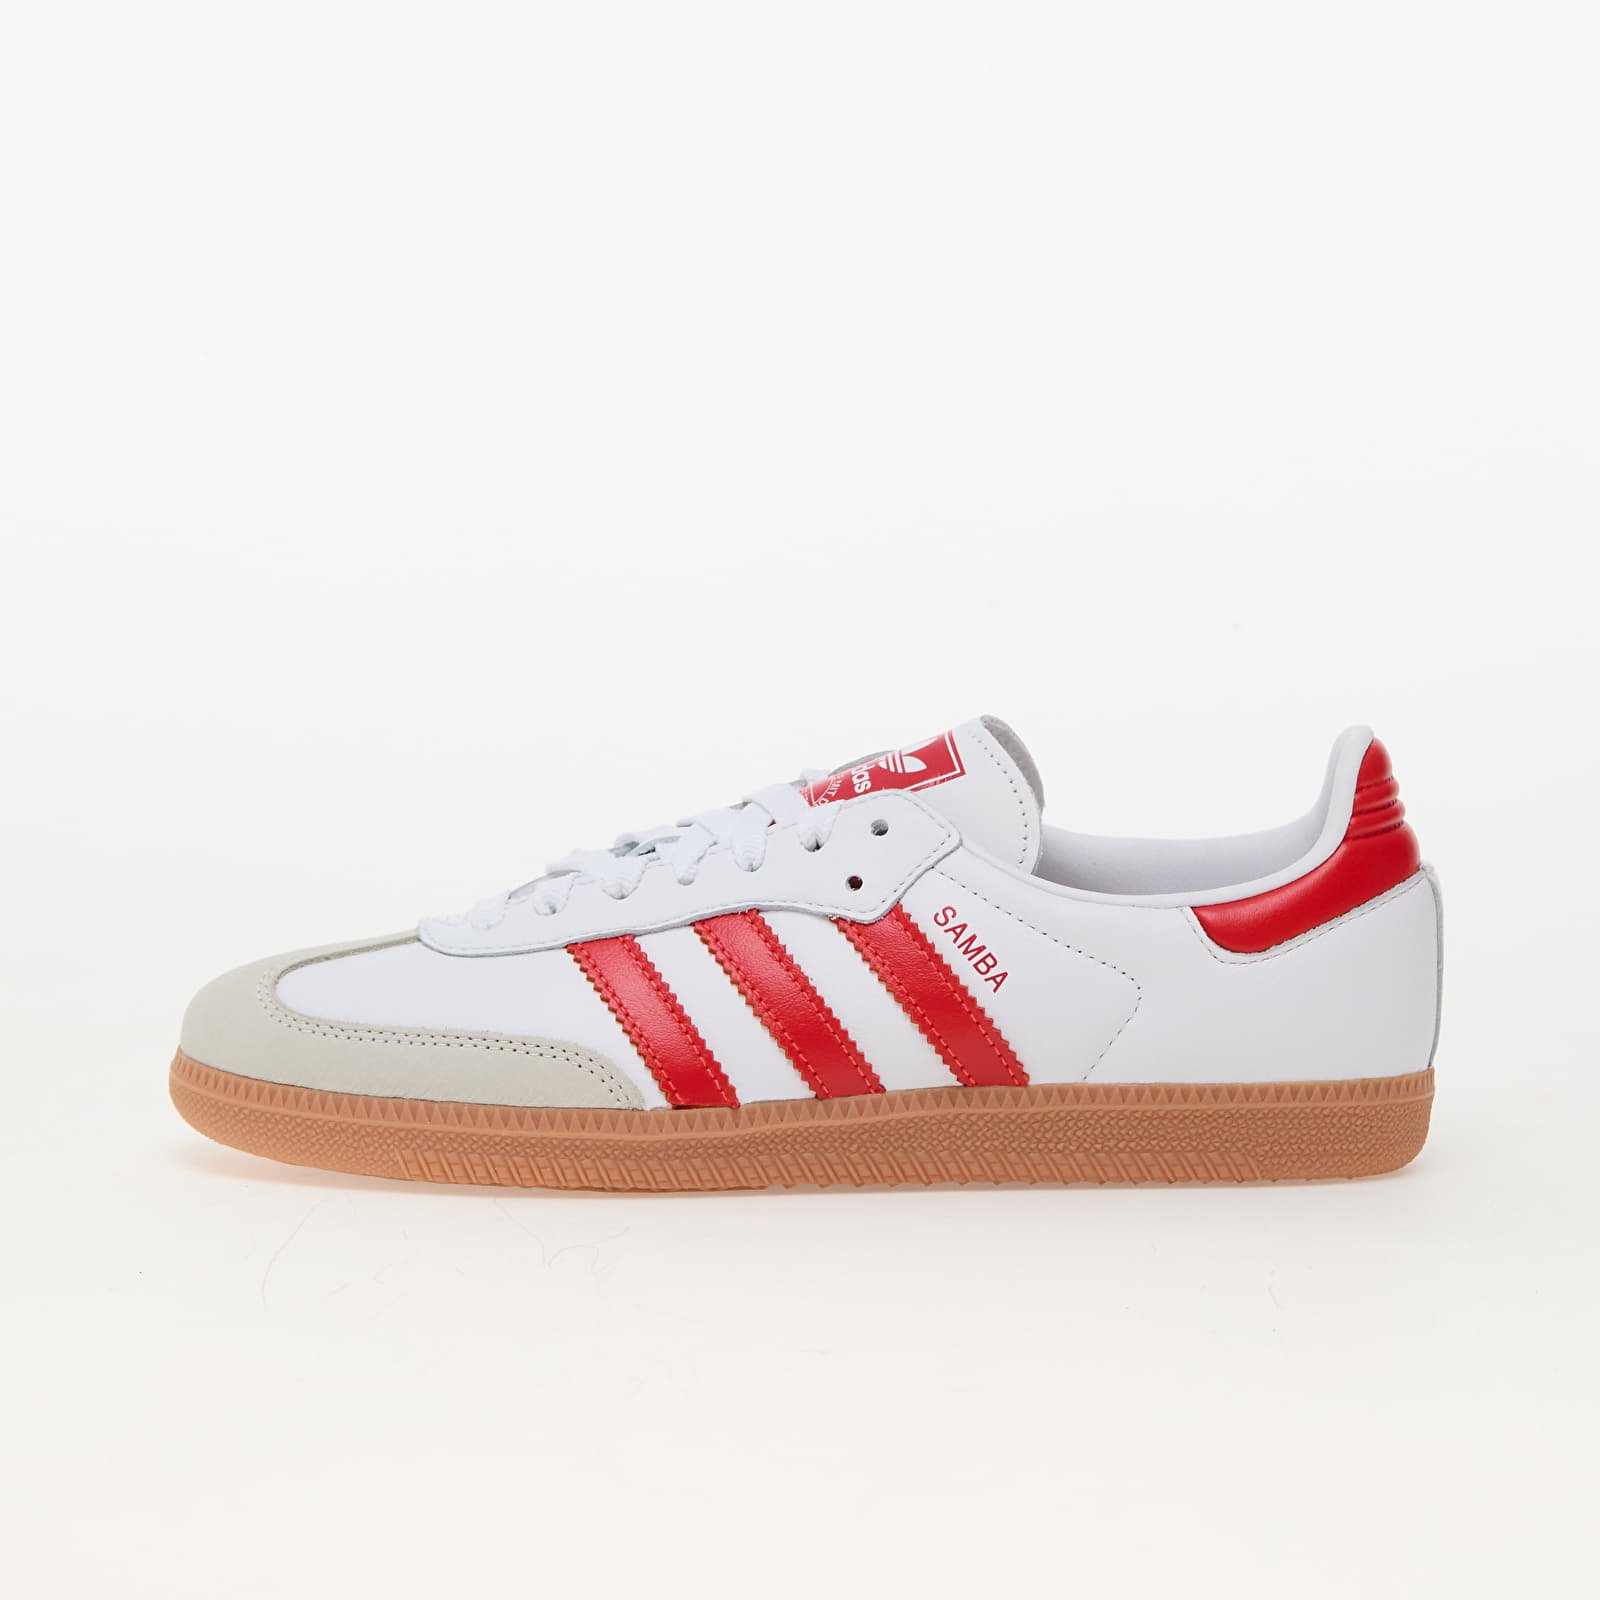 Zapatillas y zapatos de mujer adidas Samba Og W Ftw White/ Solid Red/ Off White